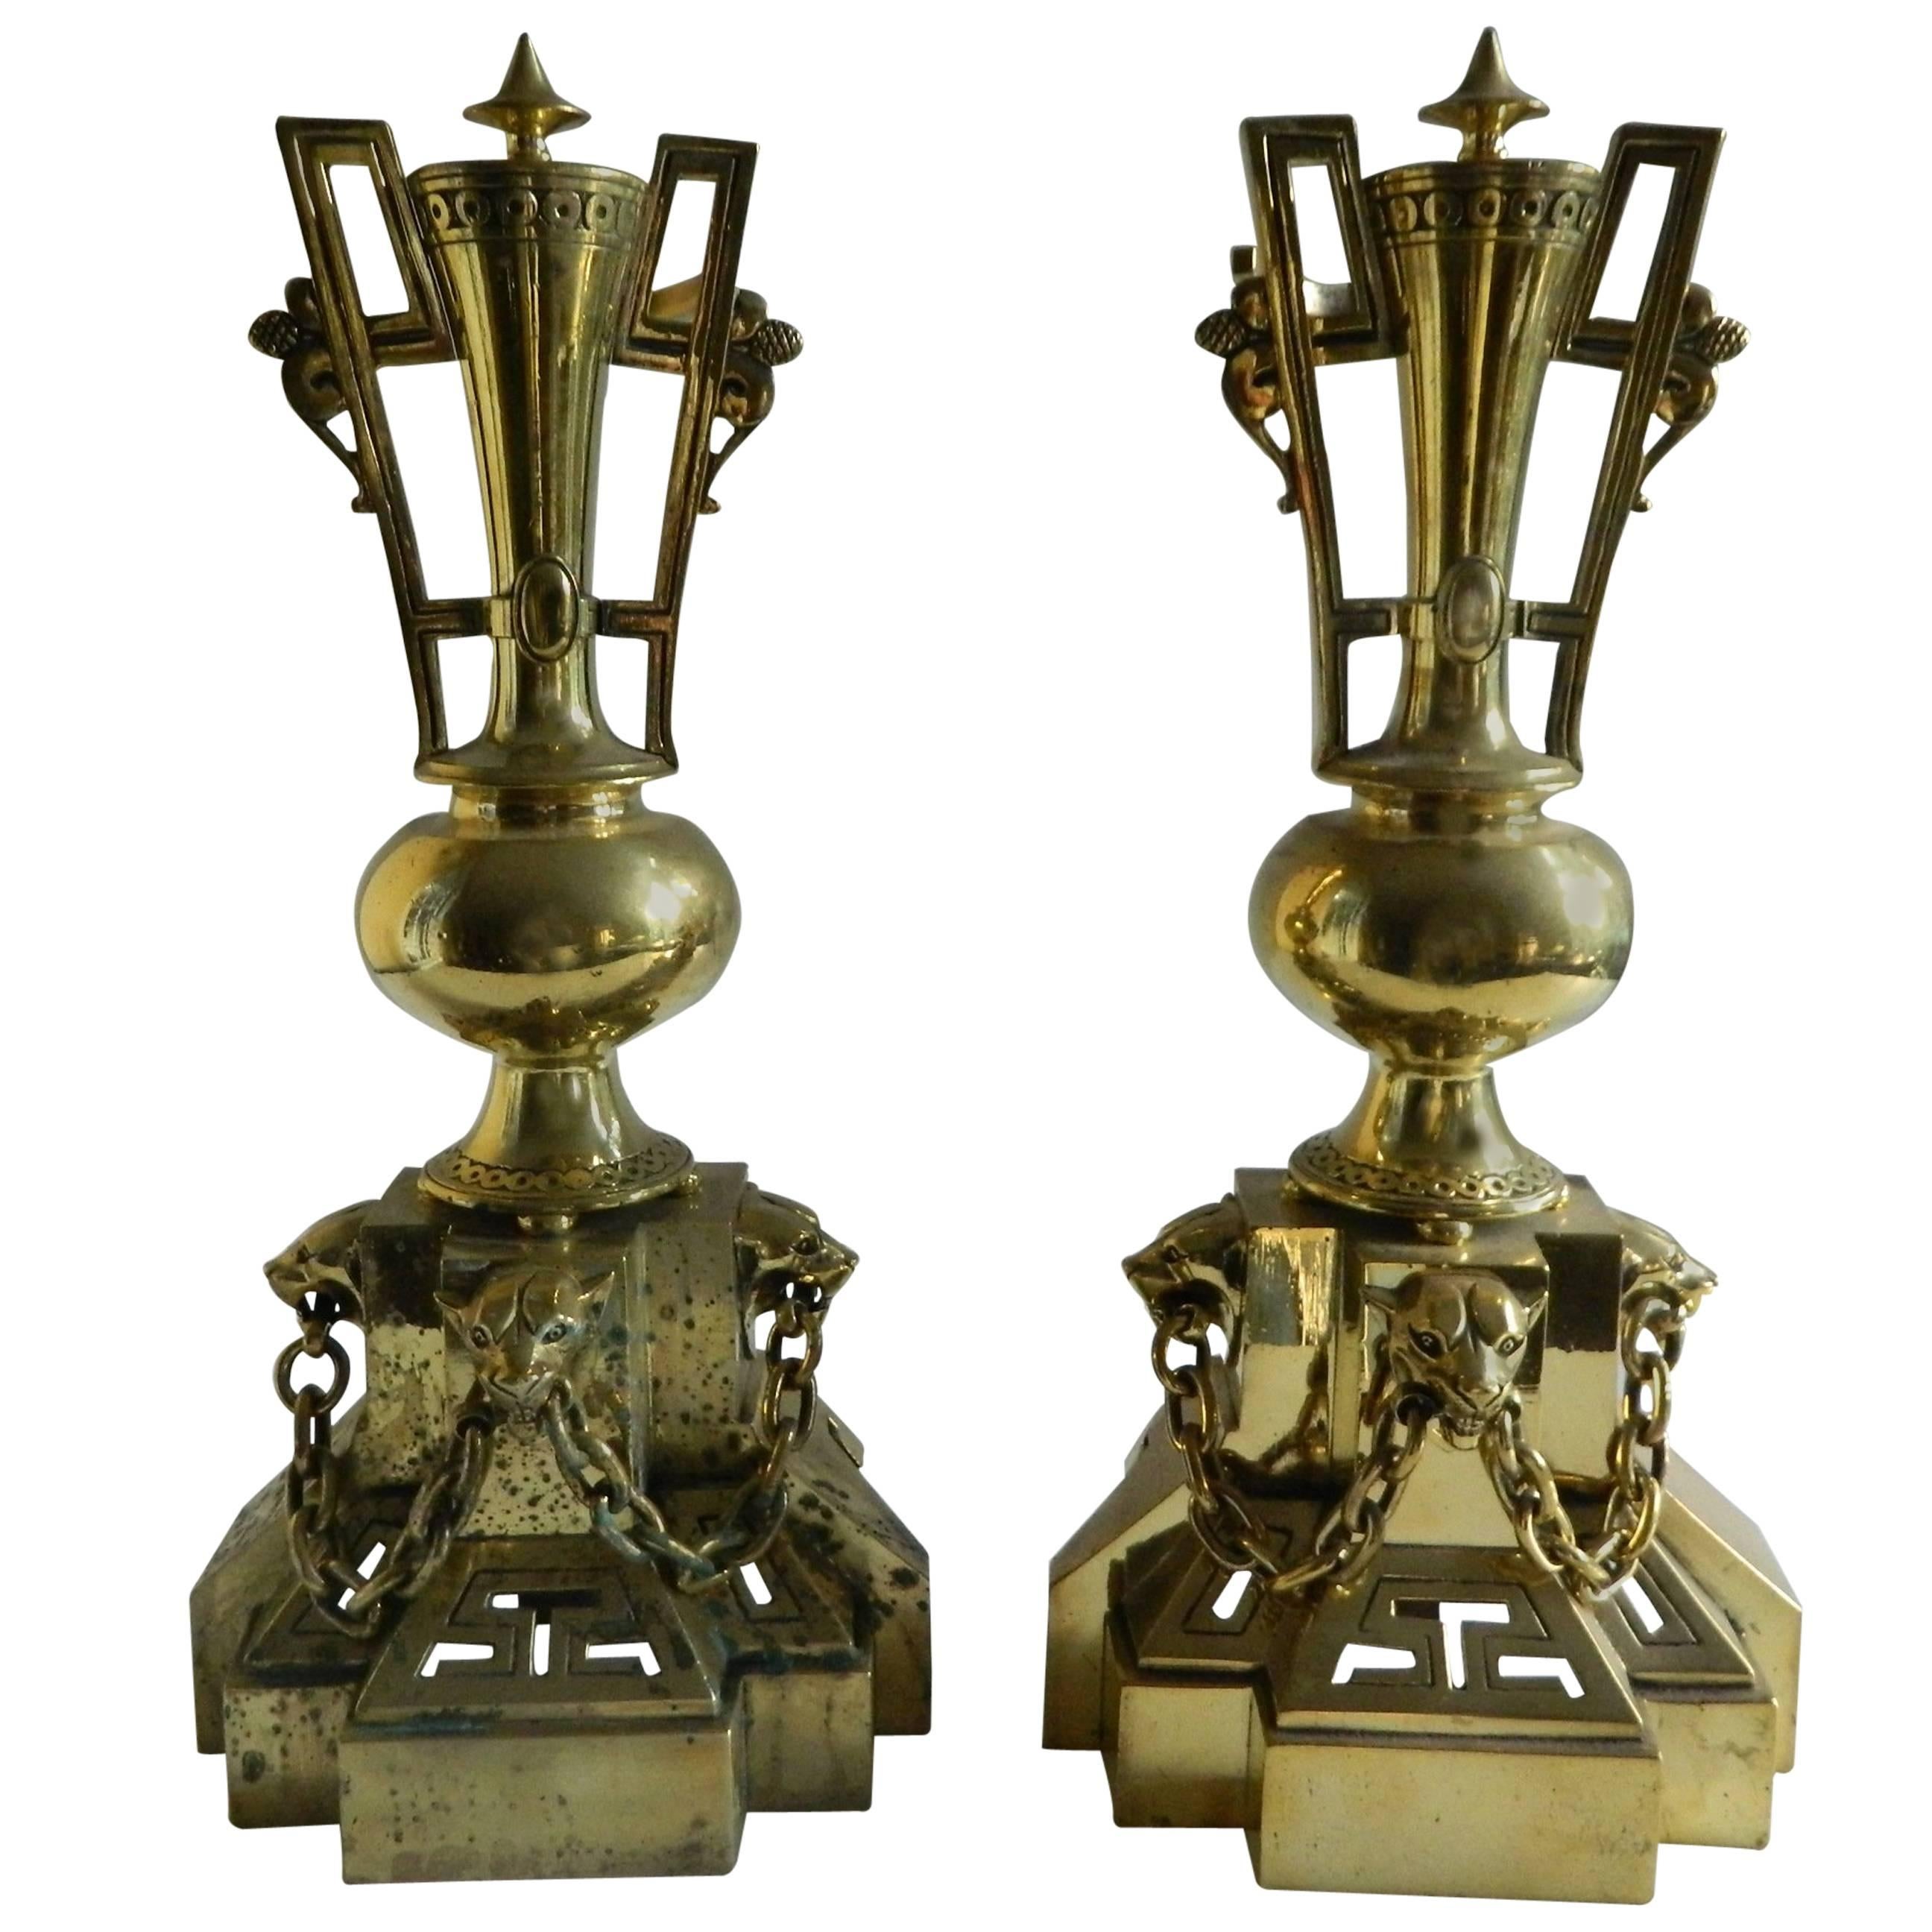 Pair of Polished Brass Chenets or Andirons, Panther Heads Motif, 19th Century